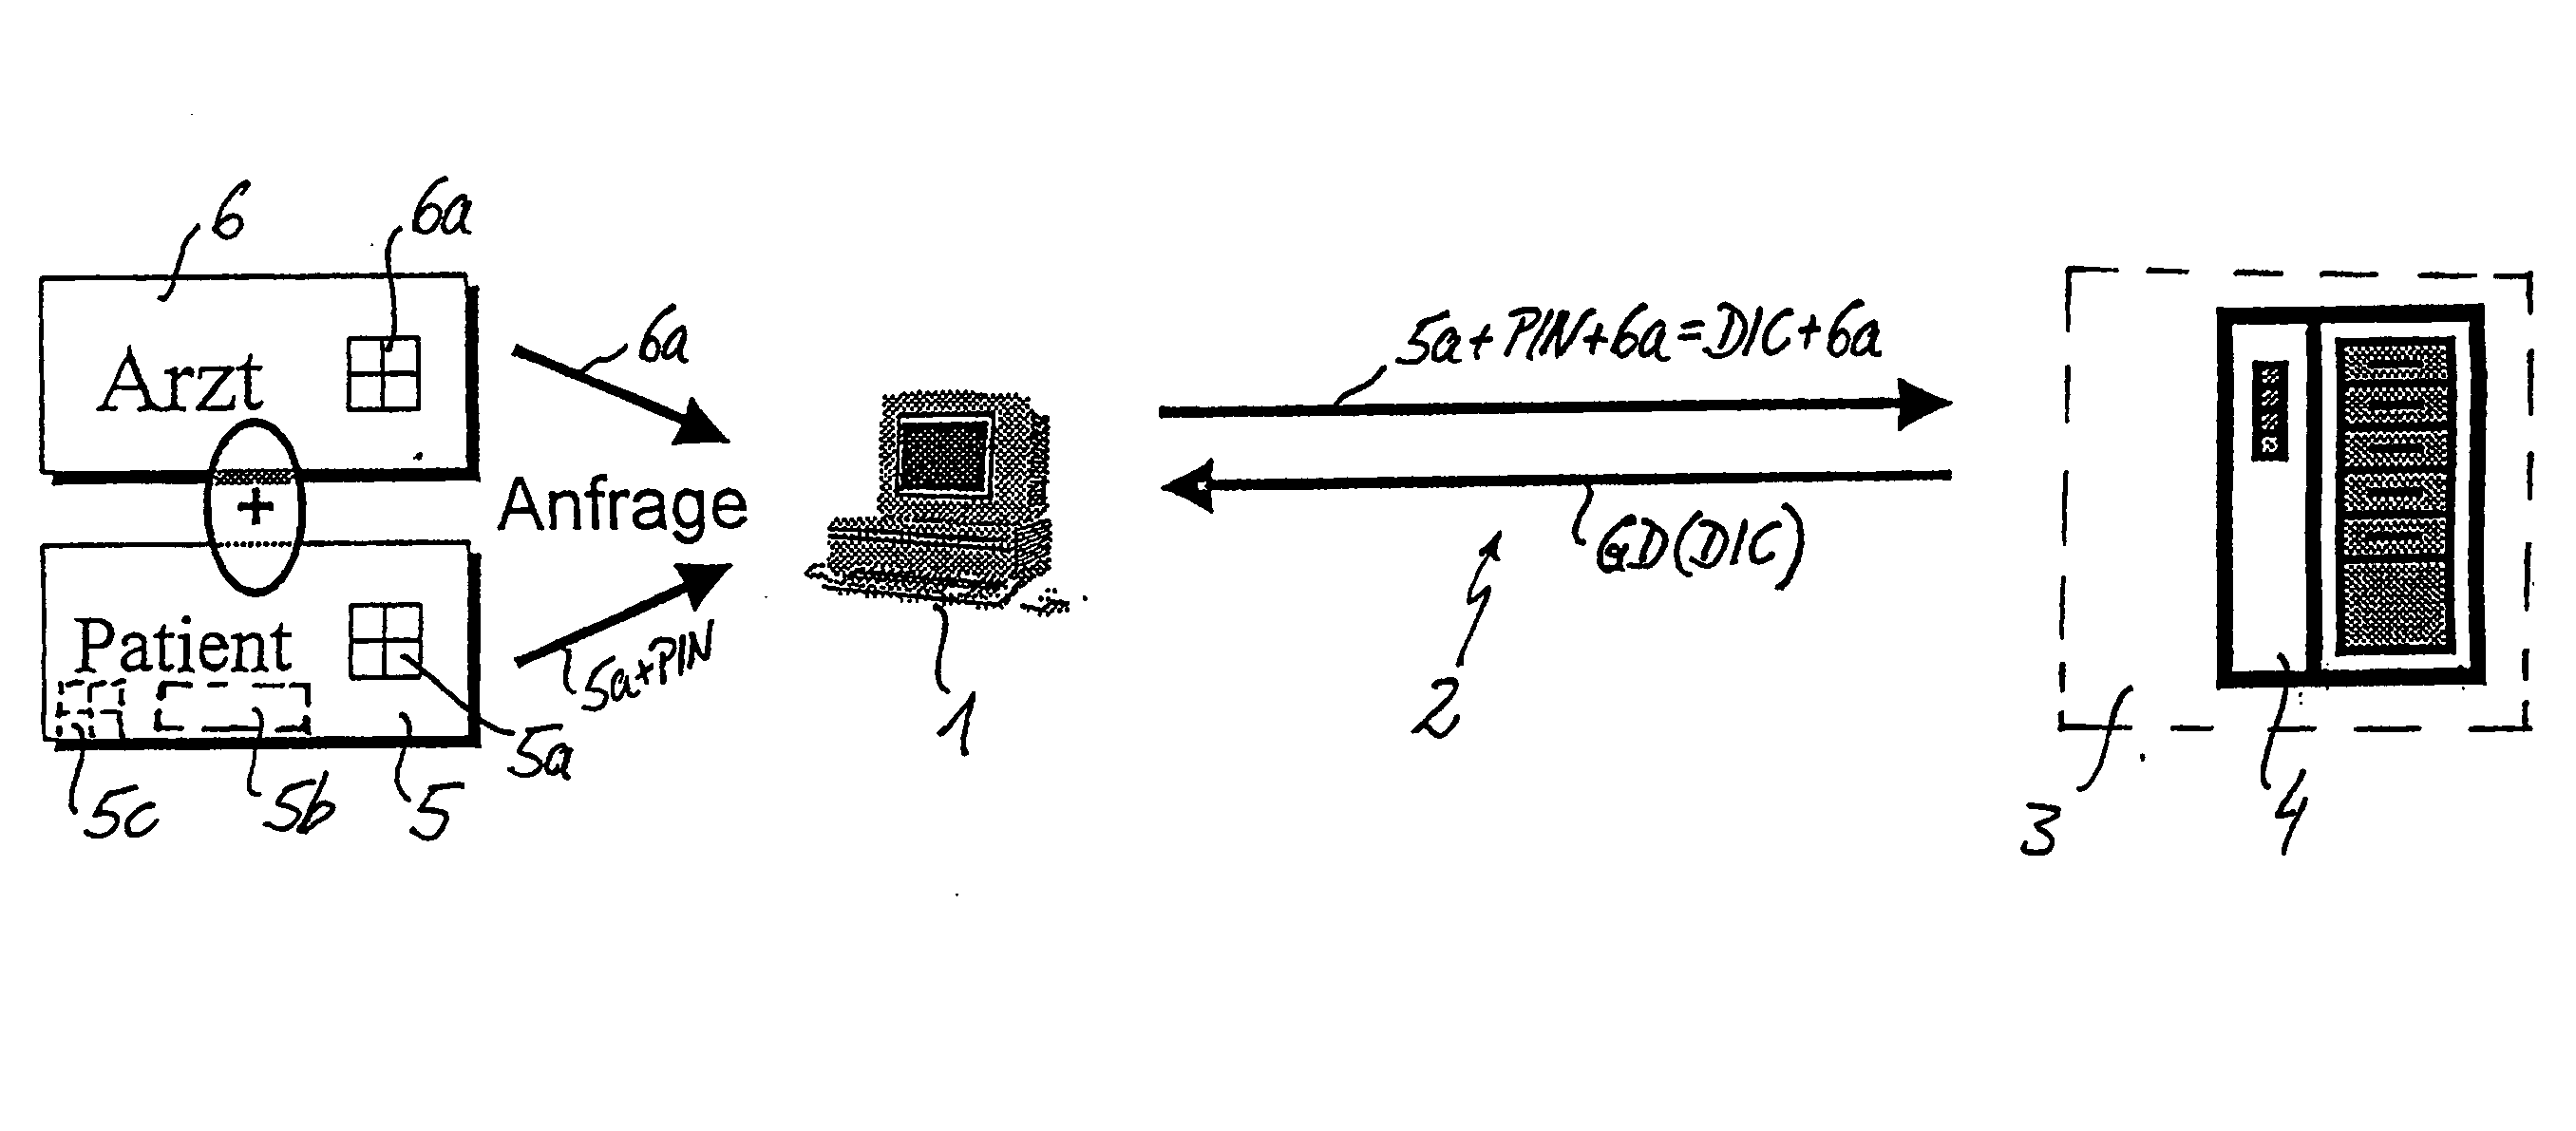 Data processing system for patent data